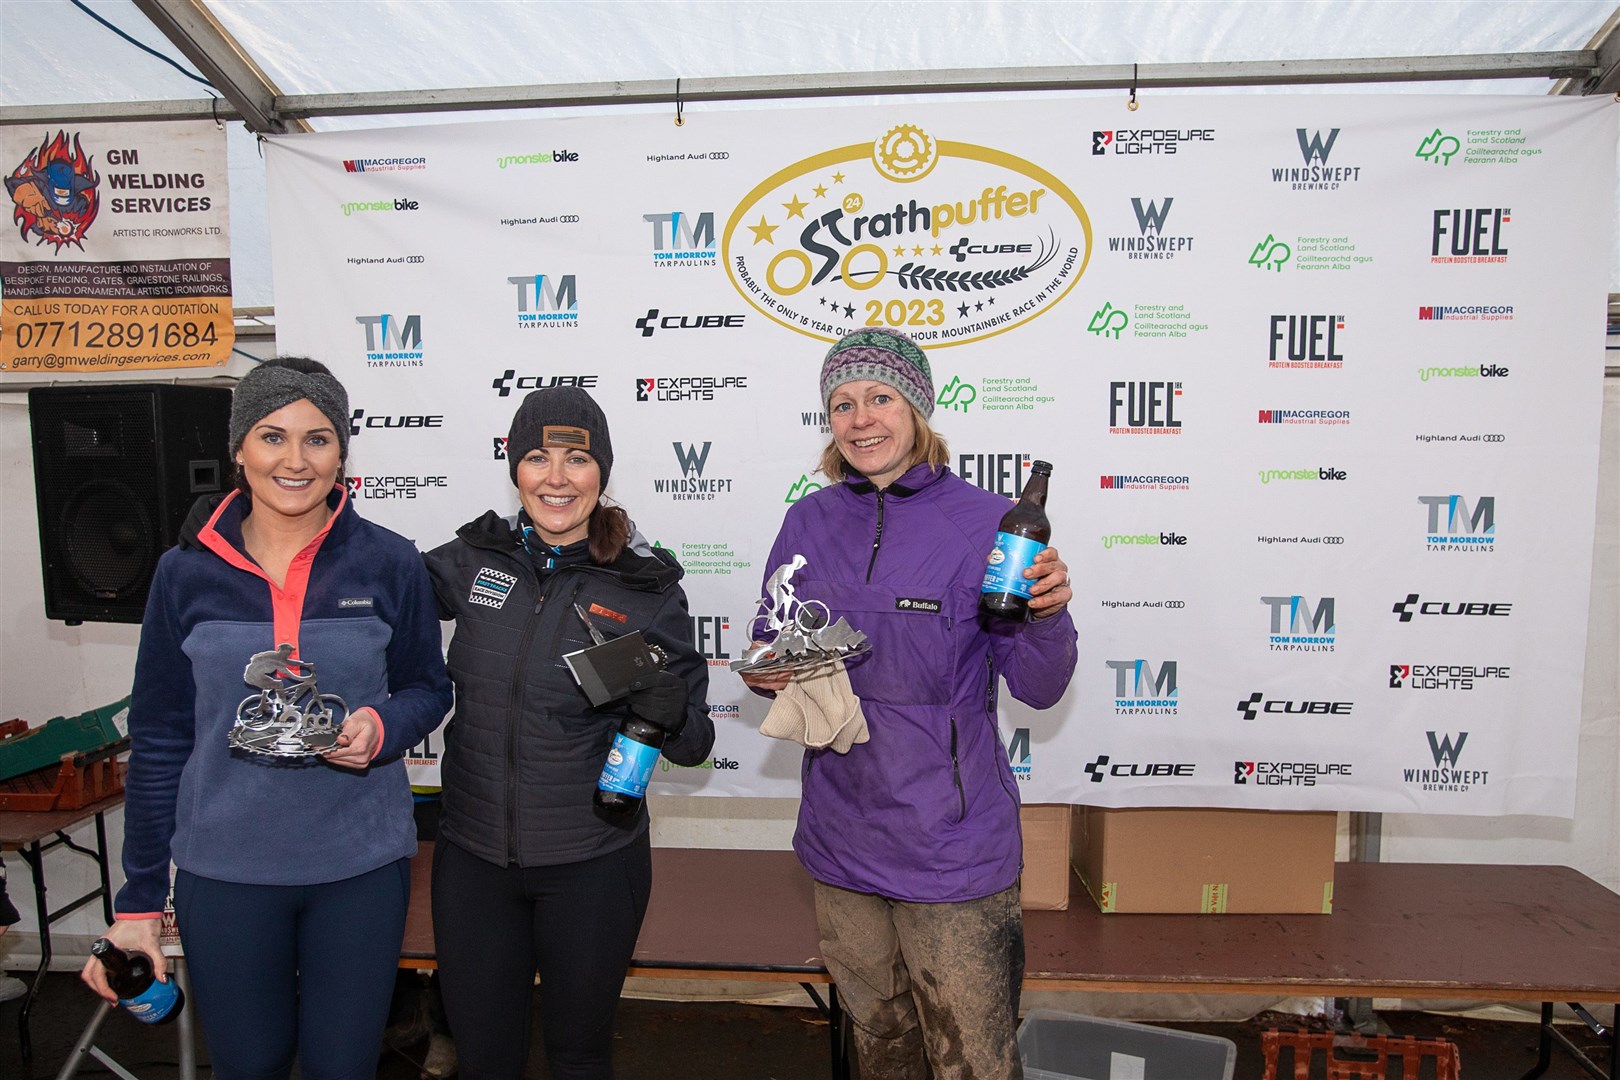 Gemma Baird (right) pictured with Catherine O'Brien and Catriona Wheeler who came second. Clare Taylor who finished third was no present at podium. Picture: Gary Williamson